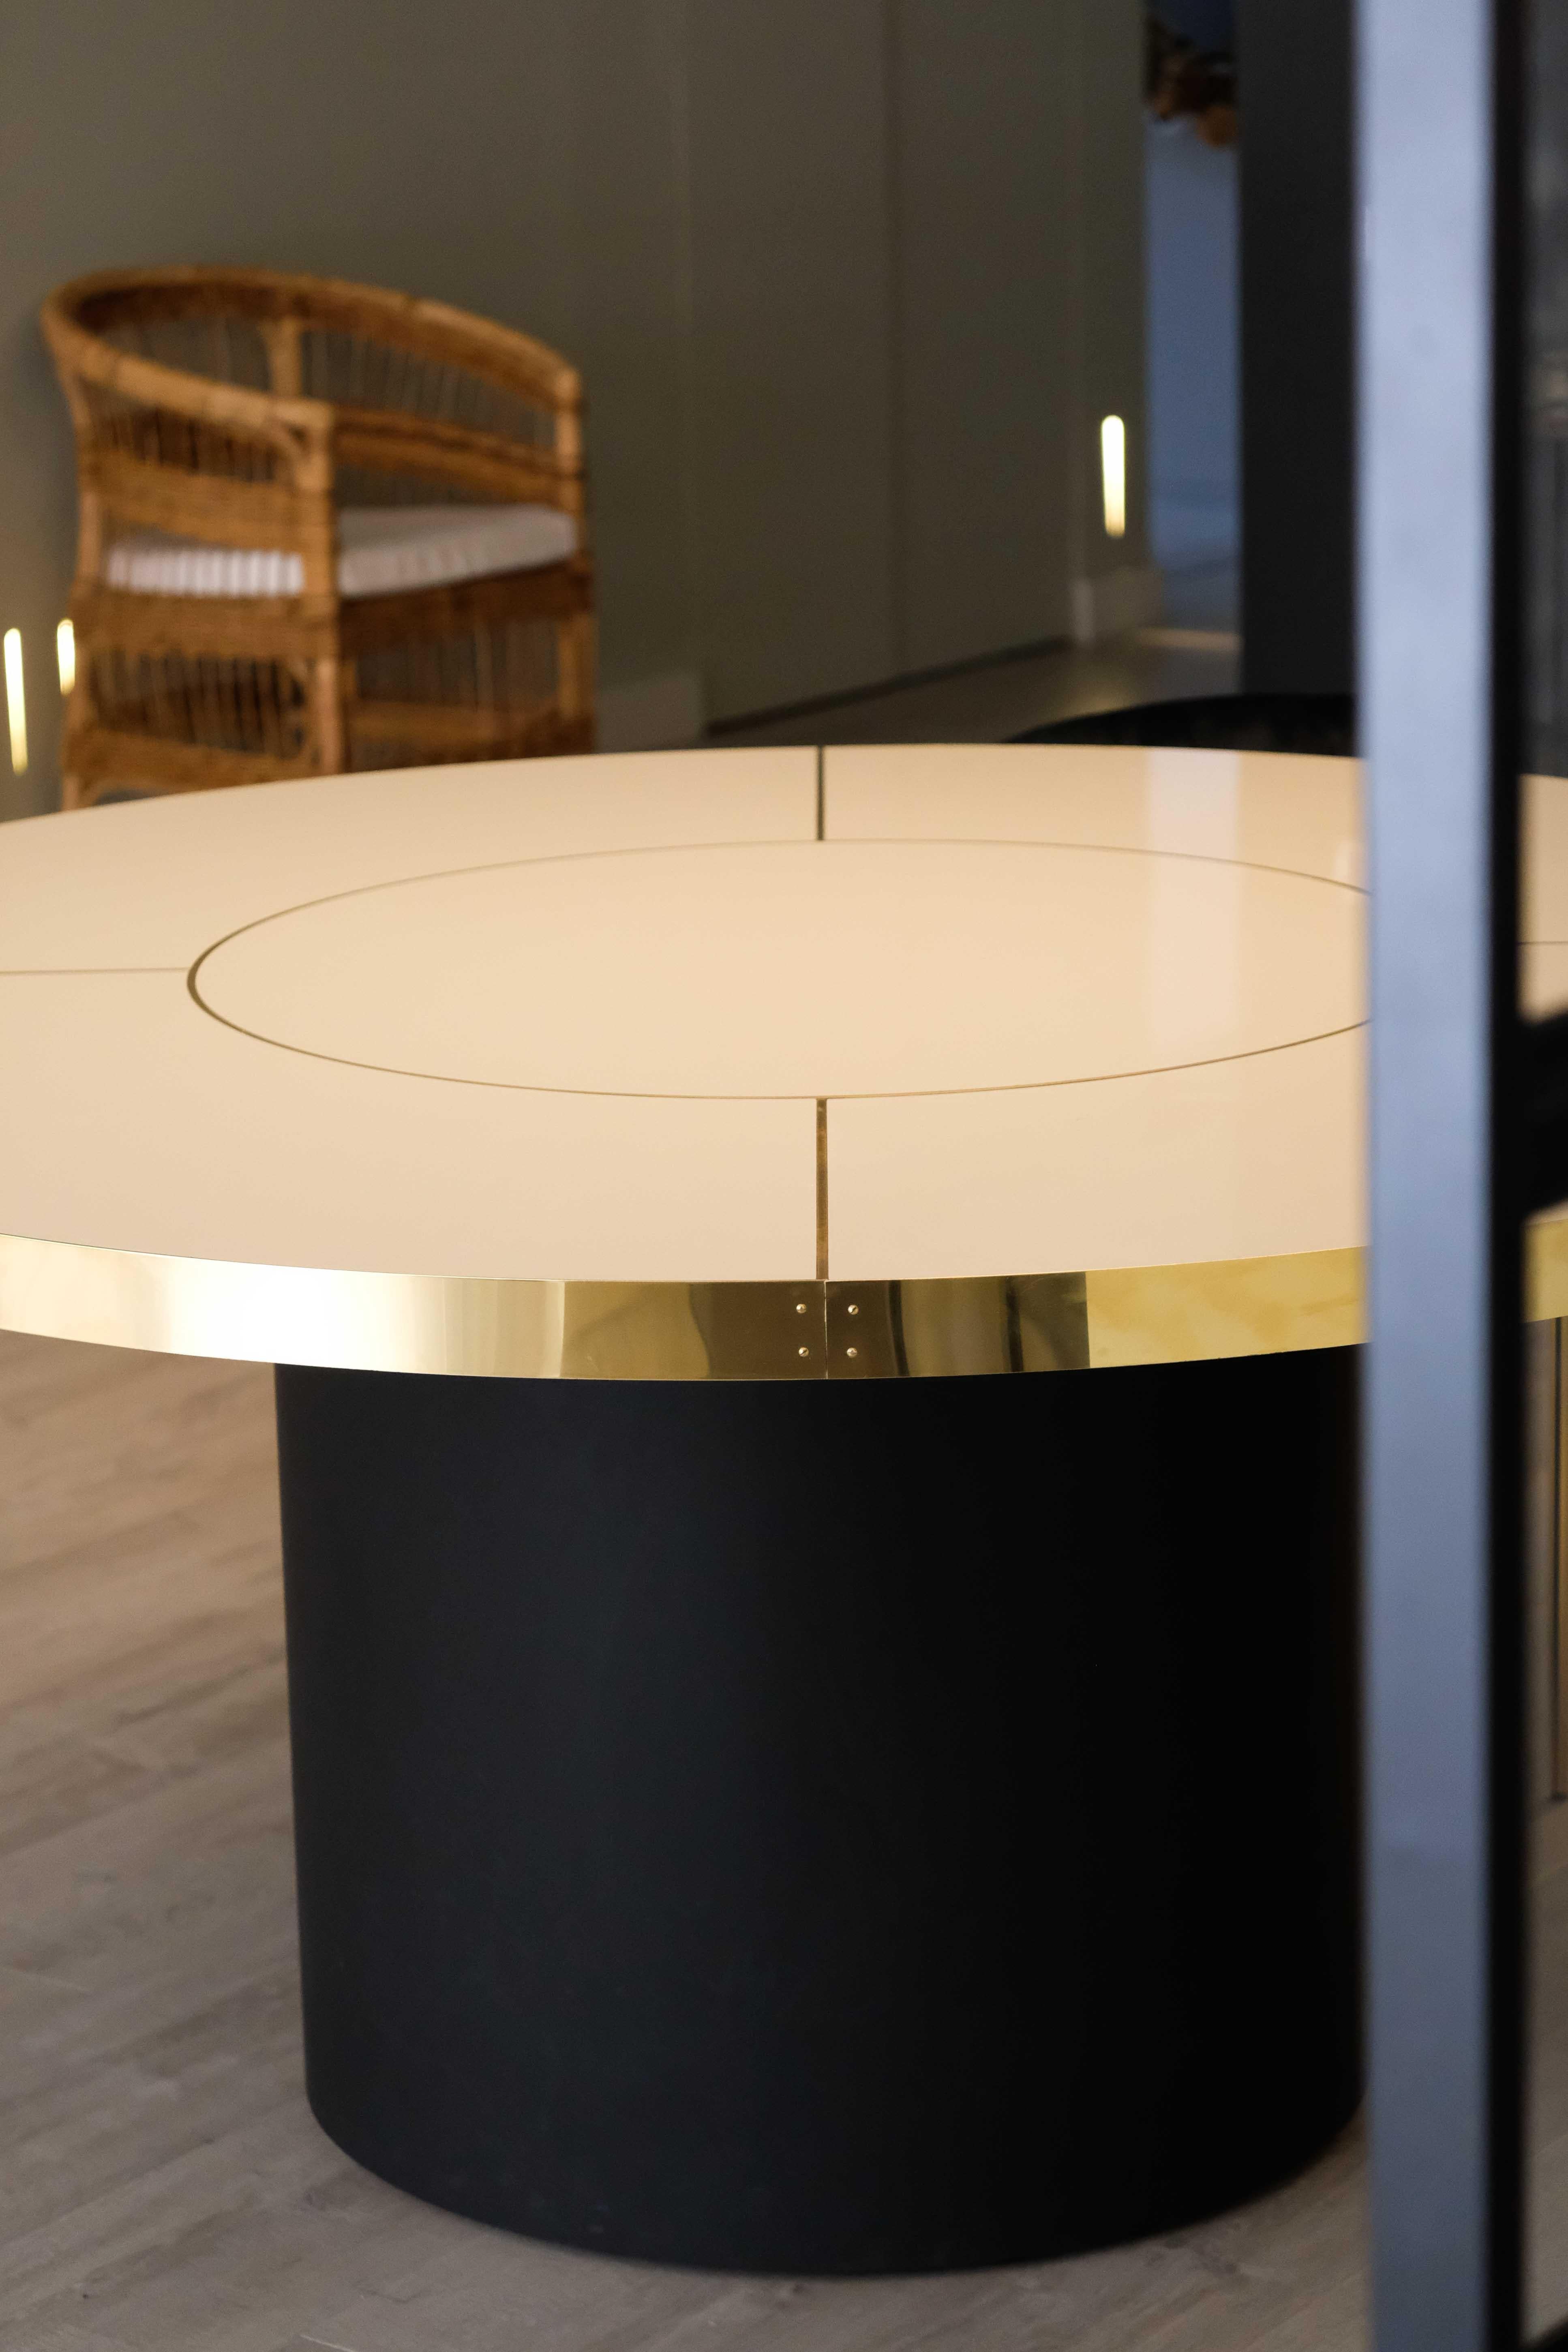 Retro Design Round Dining Table Palm Springs Style High Gloss Laminated&Brass L In New Condition For Sale In Alcoy, Alicante